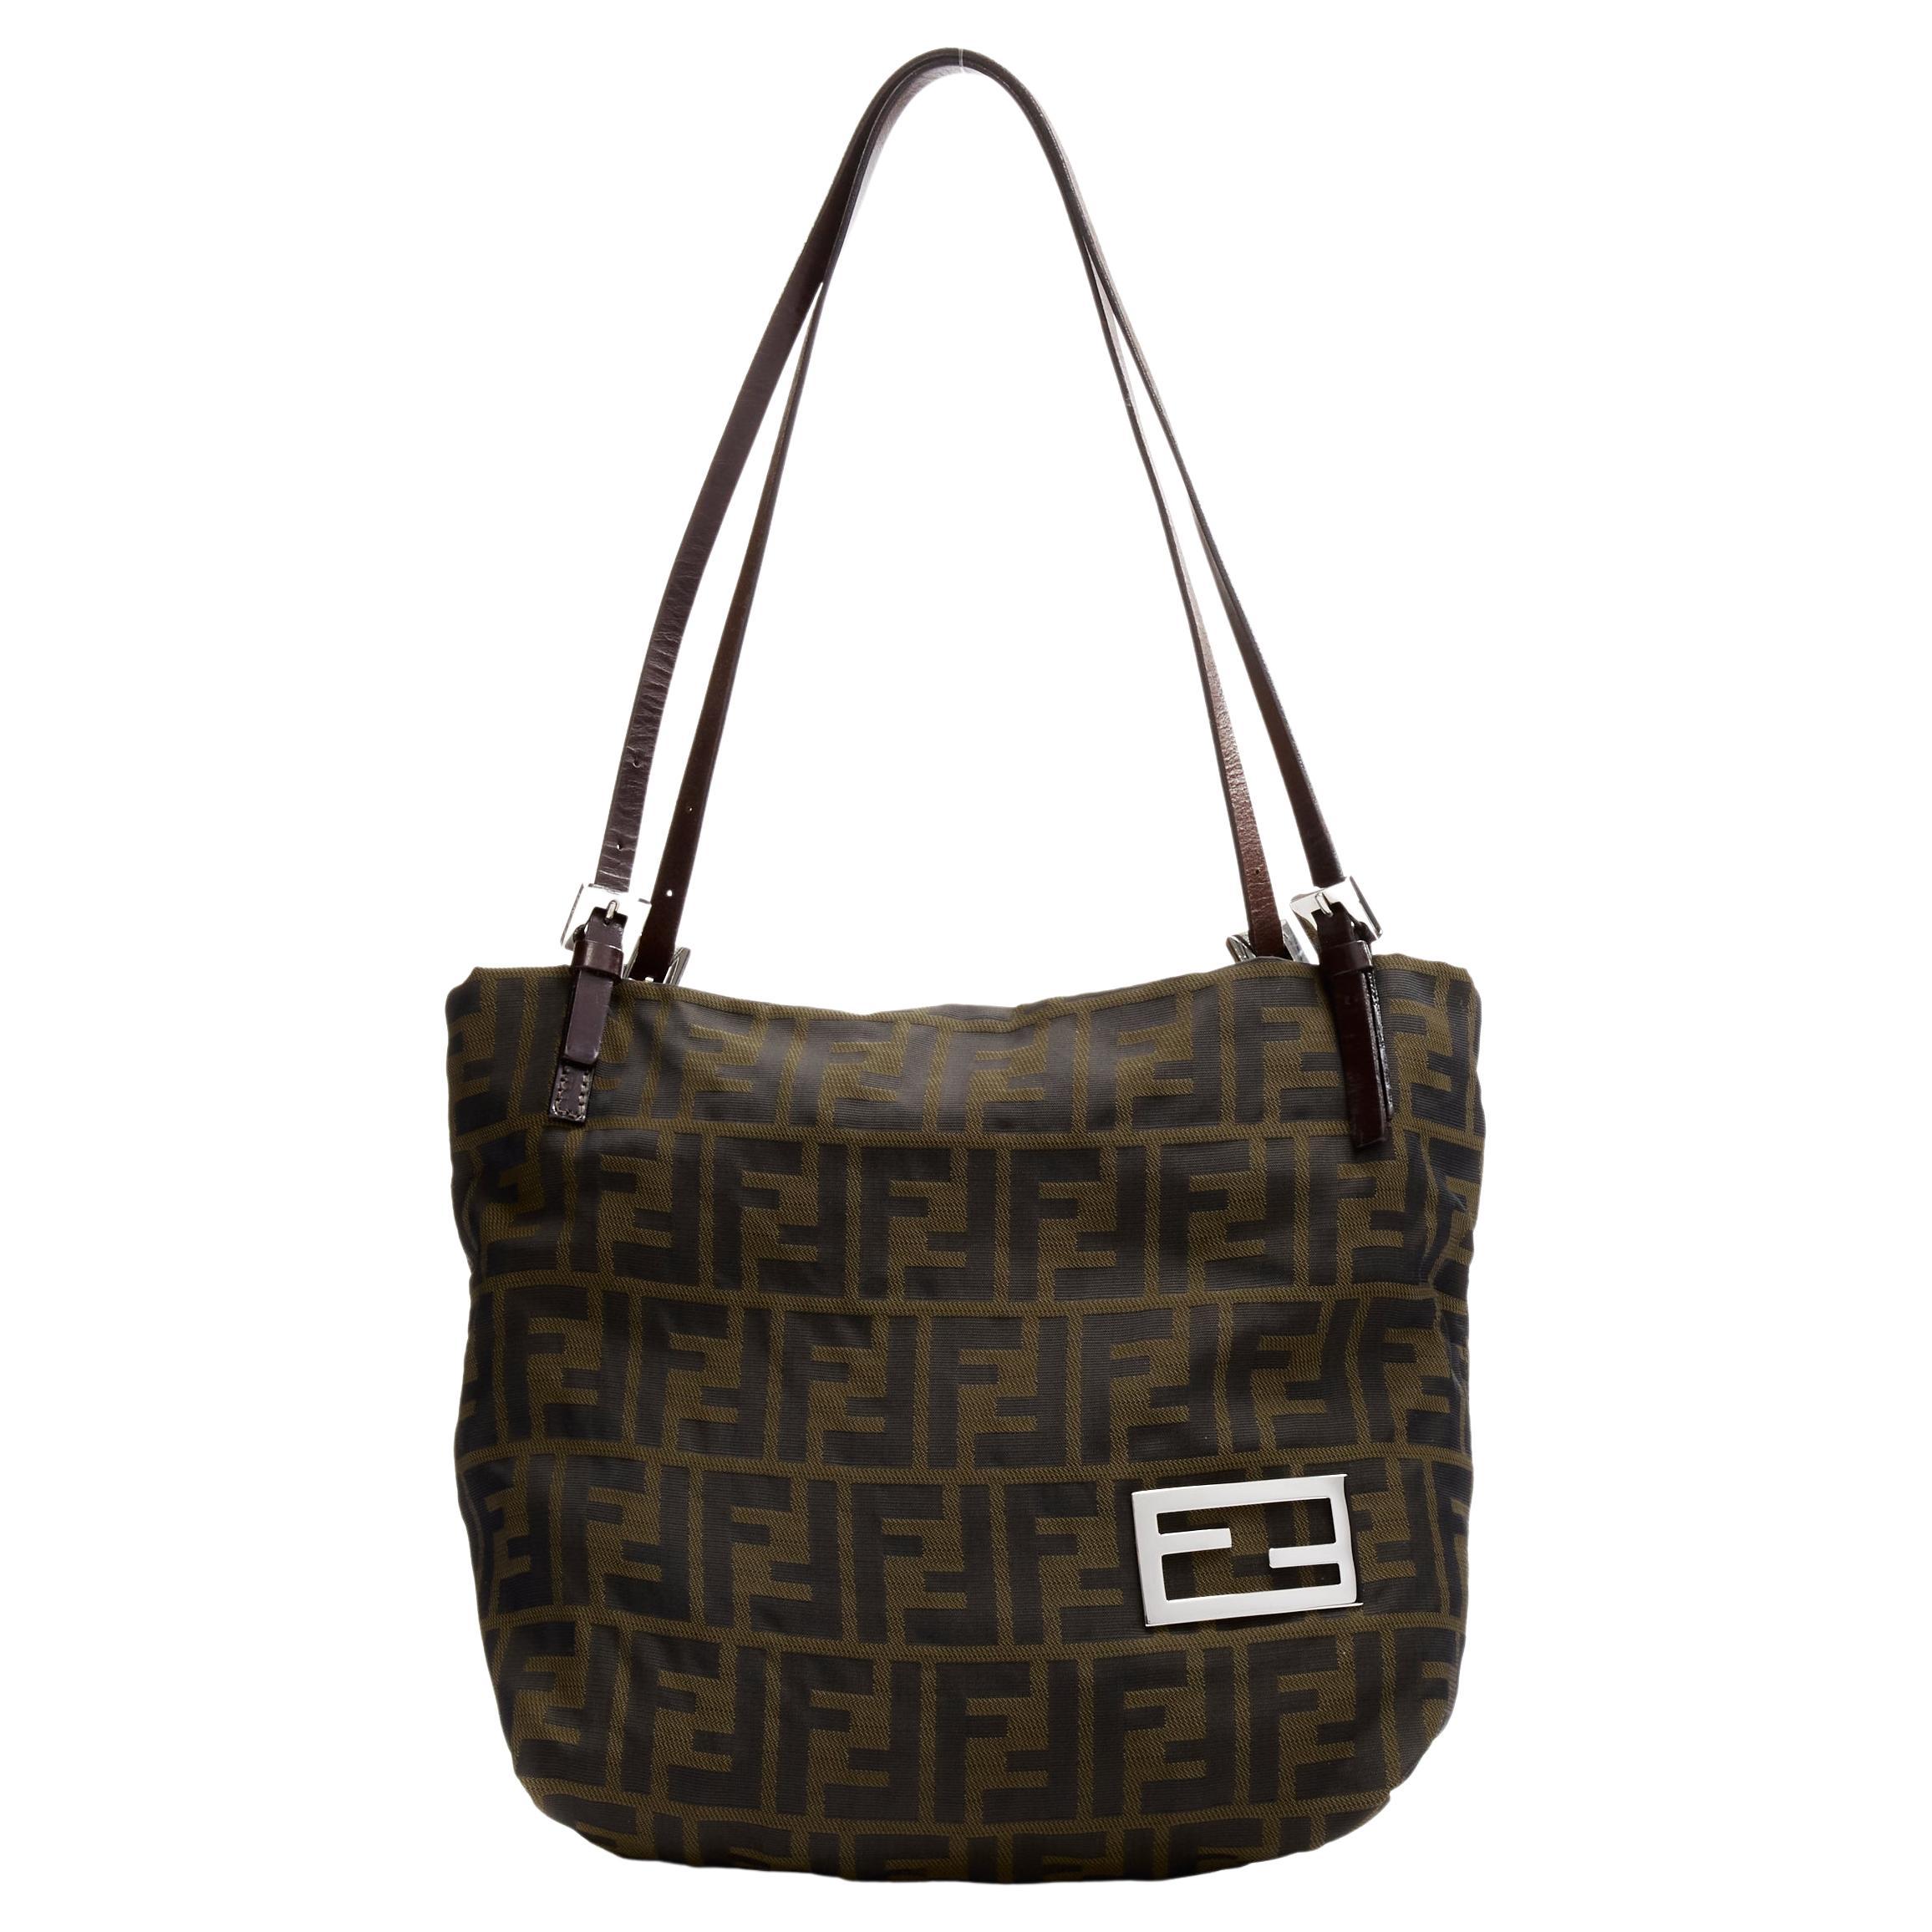 FENDI: bag in leather and embossed fabric with coated FF monogram - Tobacco